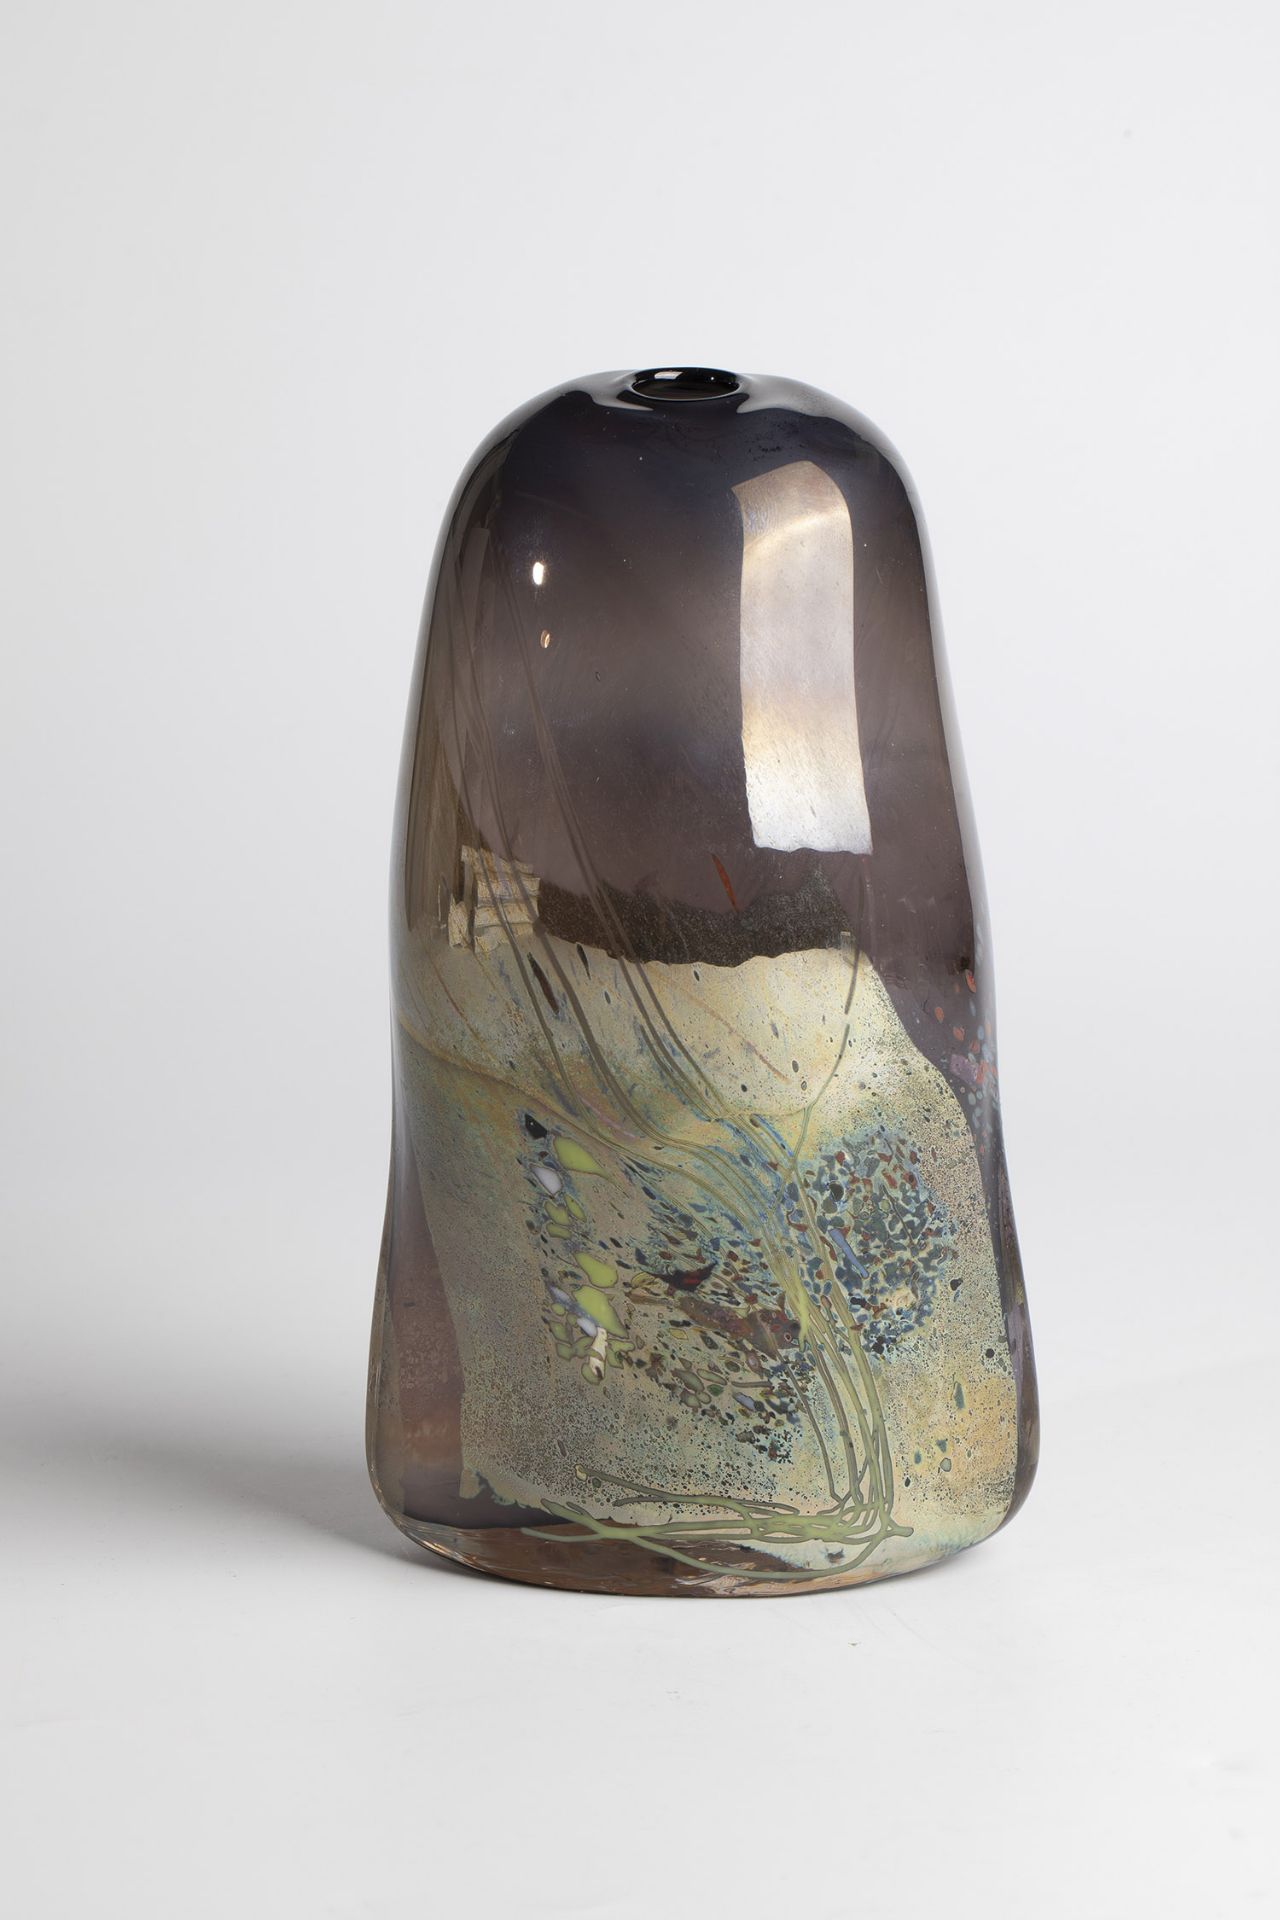 Vase Samuel J. Herman, 1980s Colorless glass, with color and oxide fusion. Signed and inscribed in